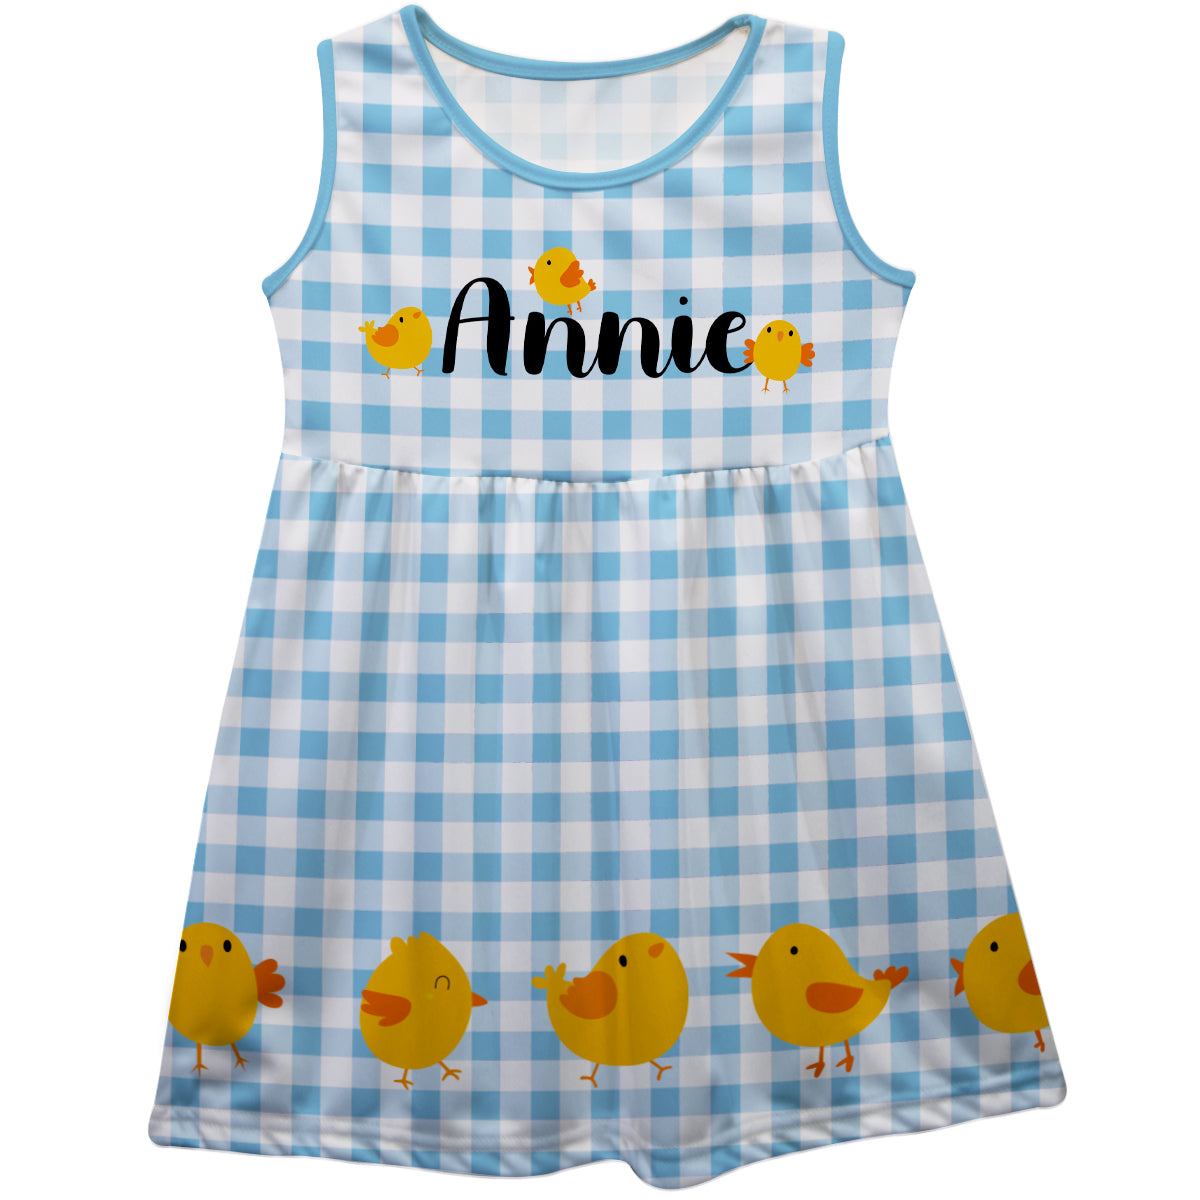 Chicks Personalized Name White and Light Blue Plaid Tank Dress